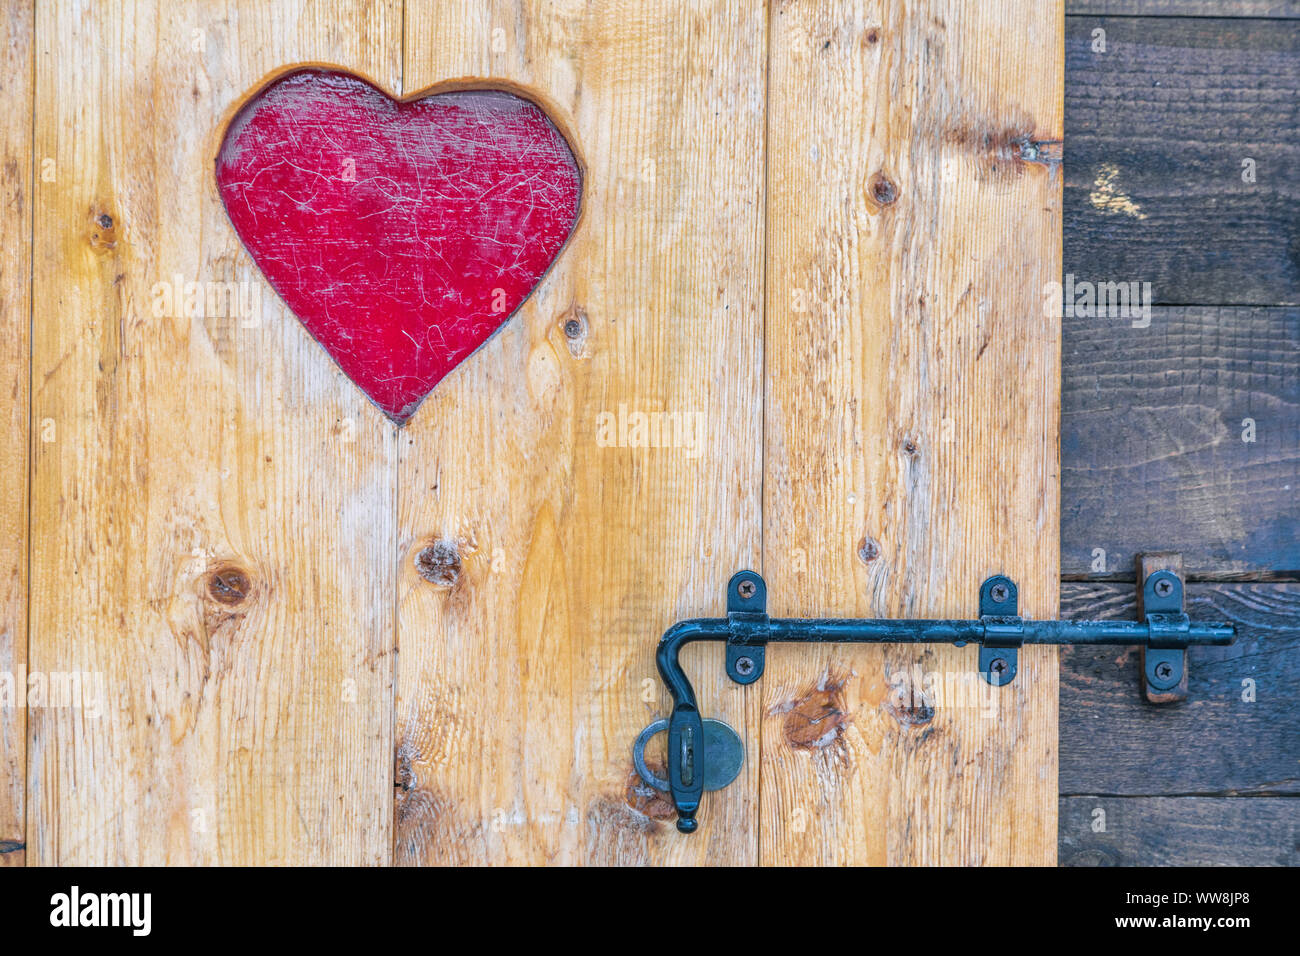 rustic wooden door with heart decoration, closed with latch Stock Photo